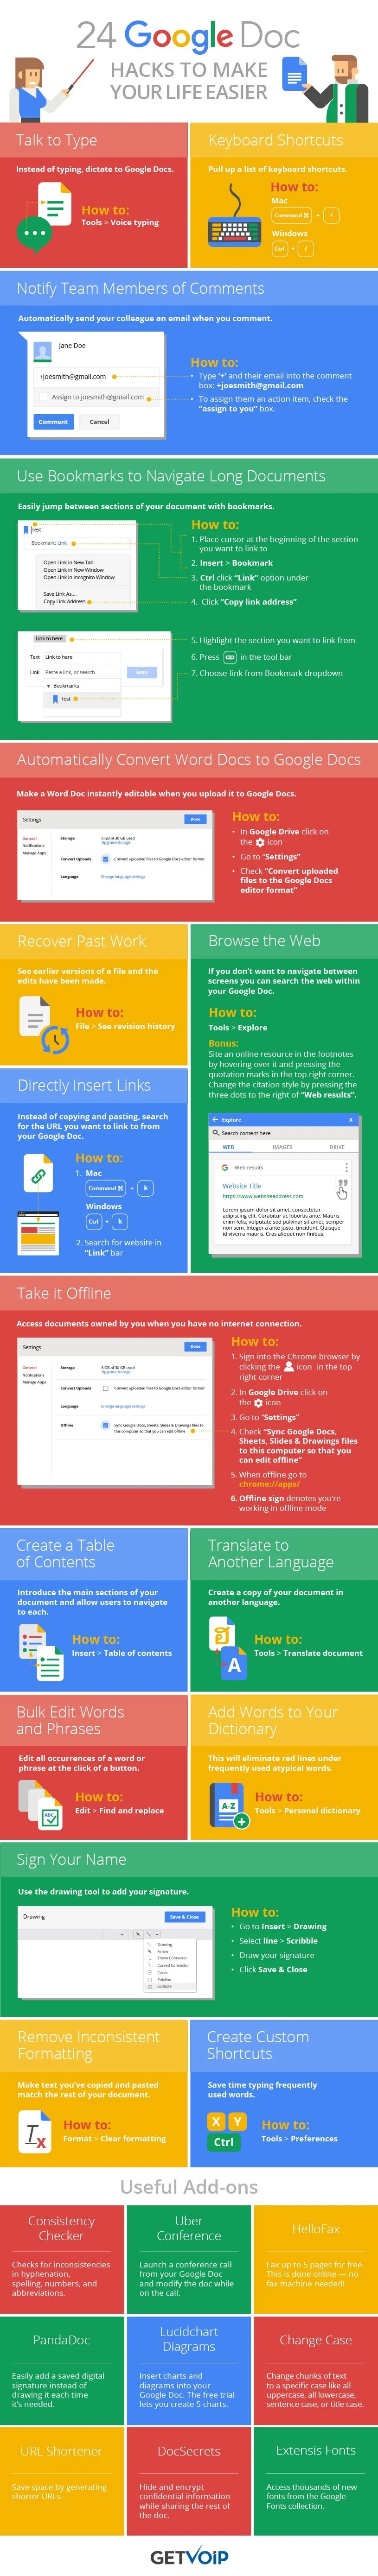 24 Google Doc Hacks to Make Running Your Business Easier - #Infographic